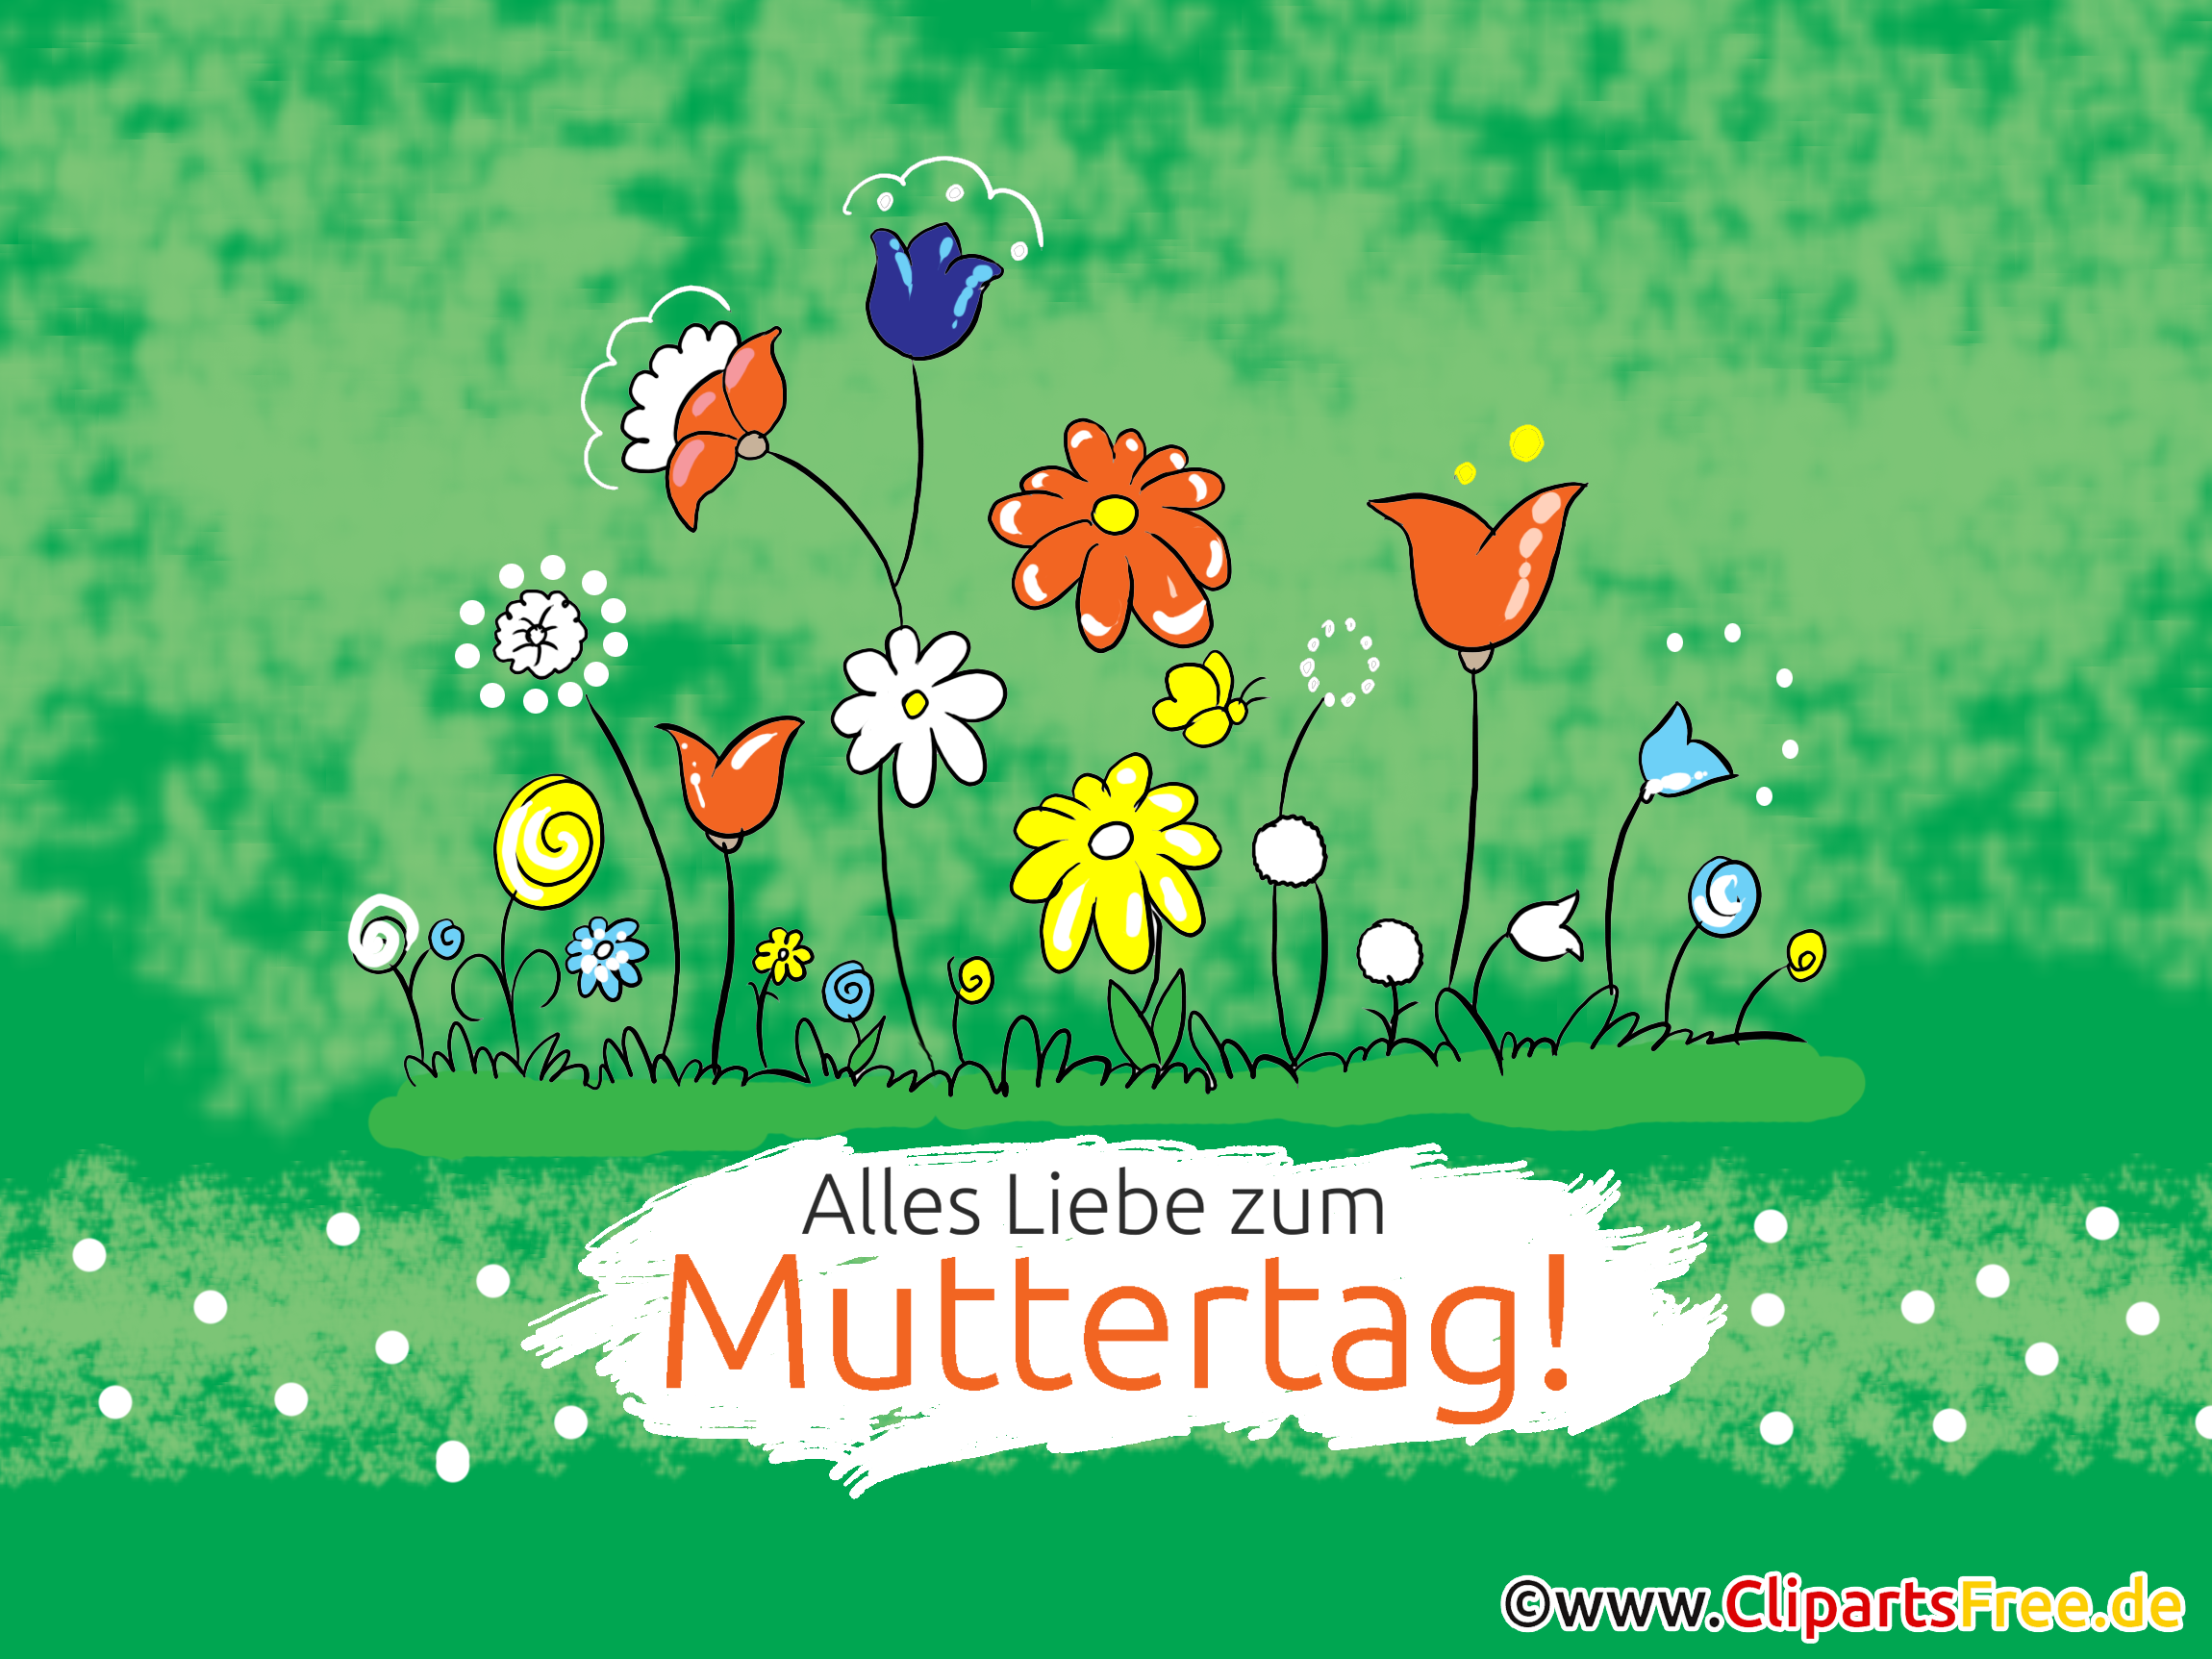 Mothers day greetings in German language